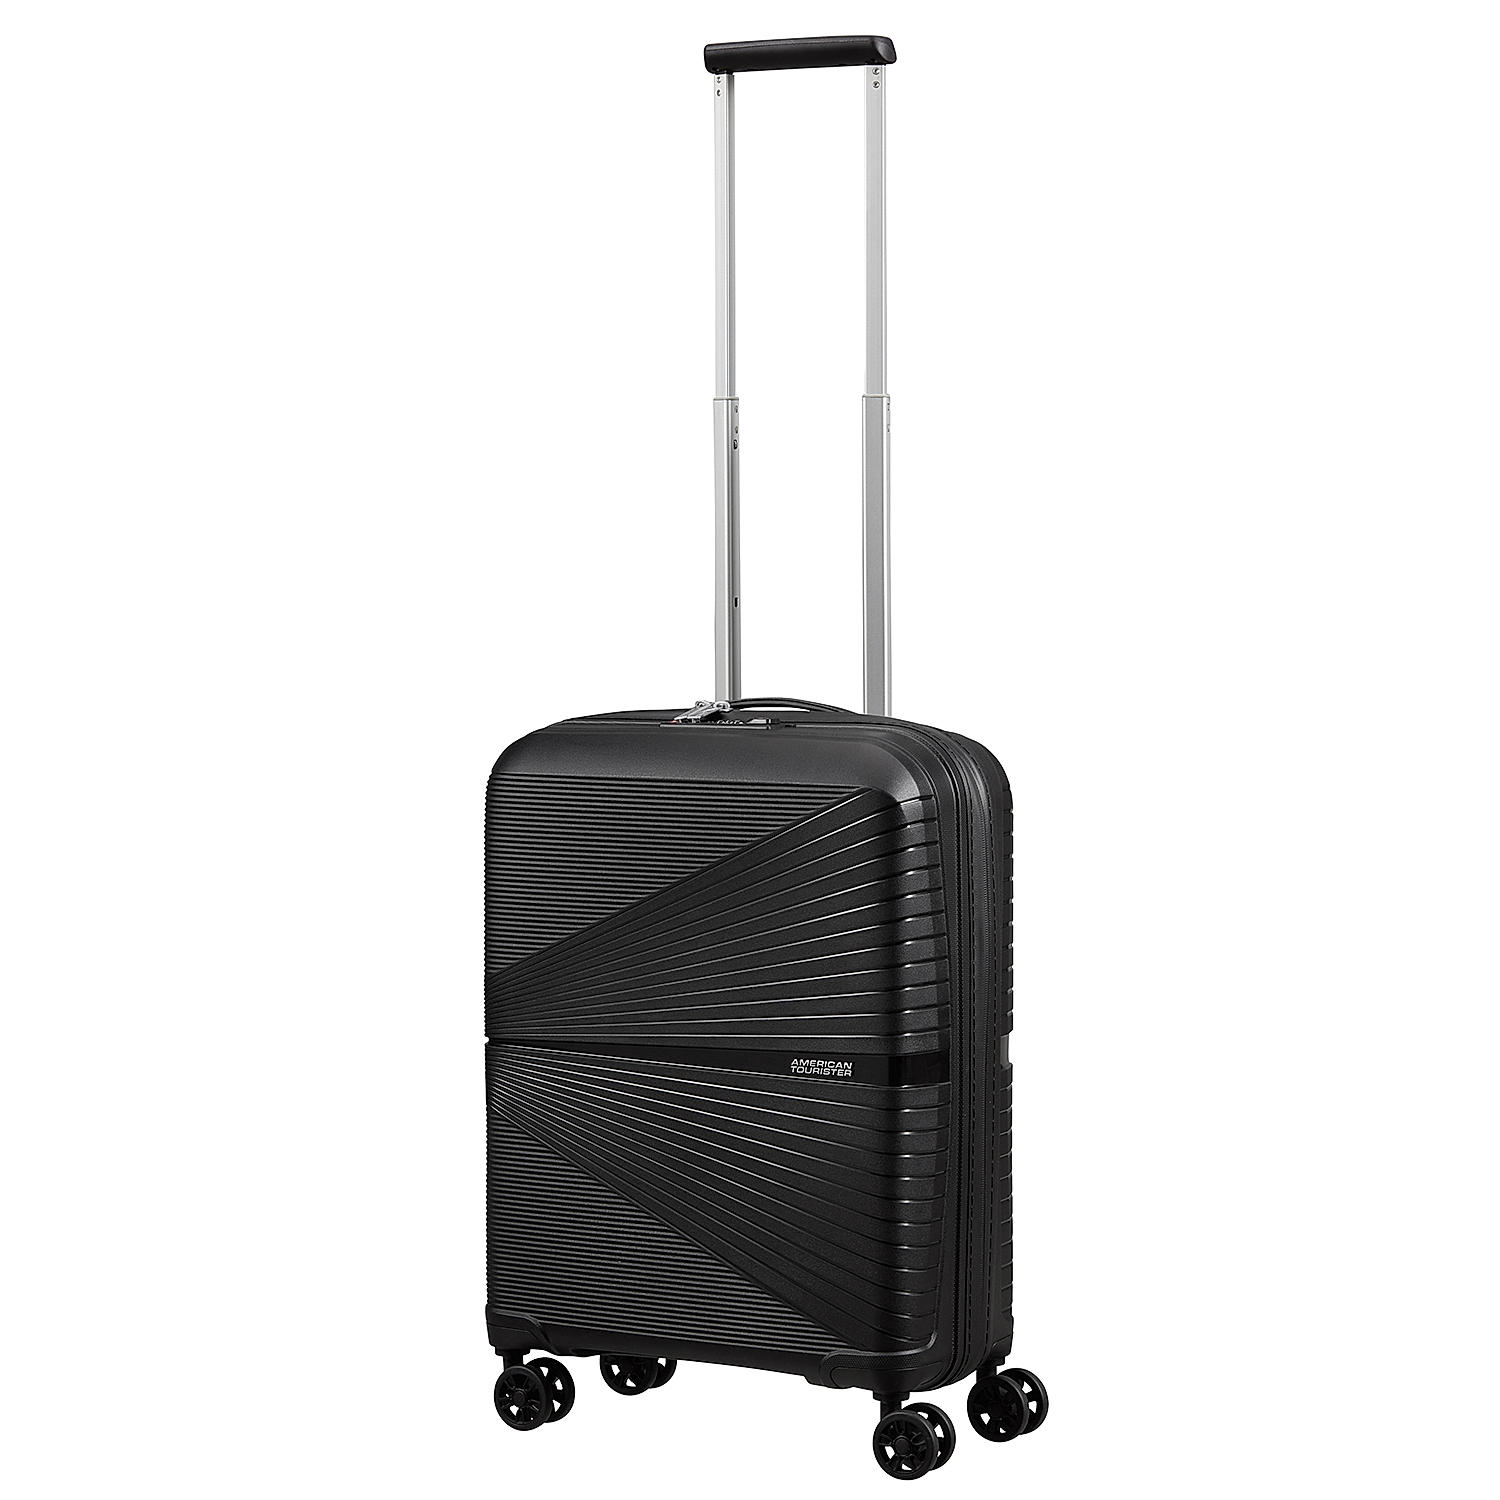 Buy Parajohn Lightweight 3-Pieces Polypropylene Hard Side Travel Luggage  Trolley Bag Set With Lock For Men/Women/Unisex, Hard Shell Strong Online -  Shop Fashion, Accessories & Luggage on Carrefour UAE